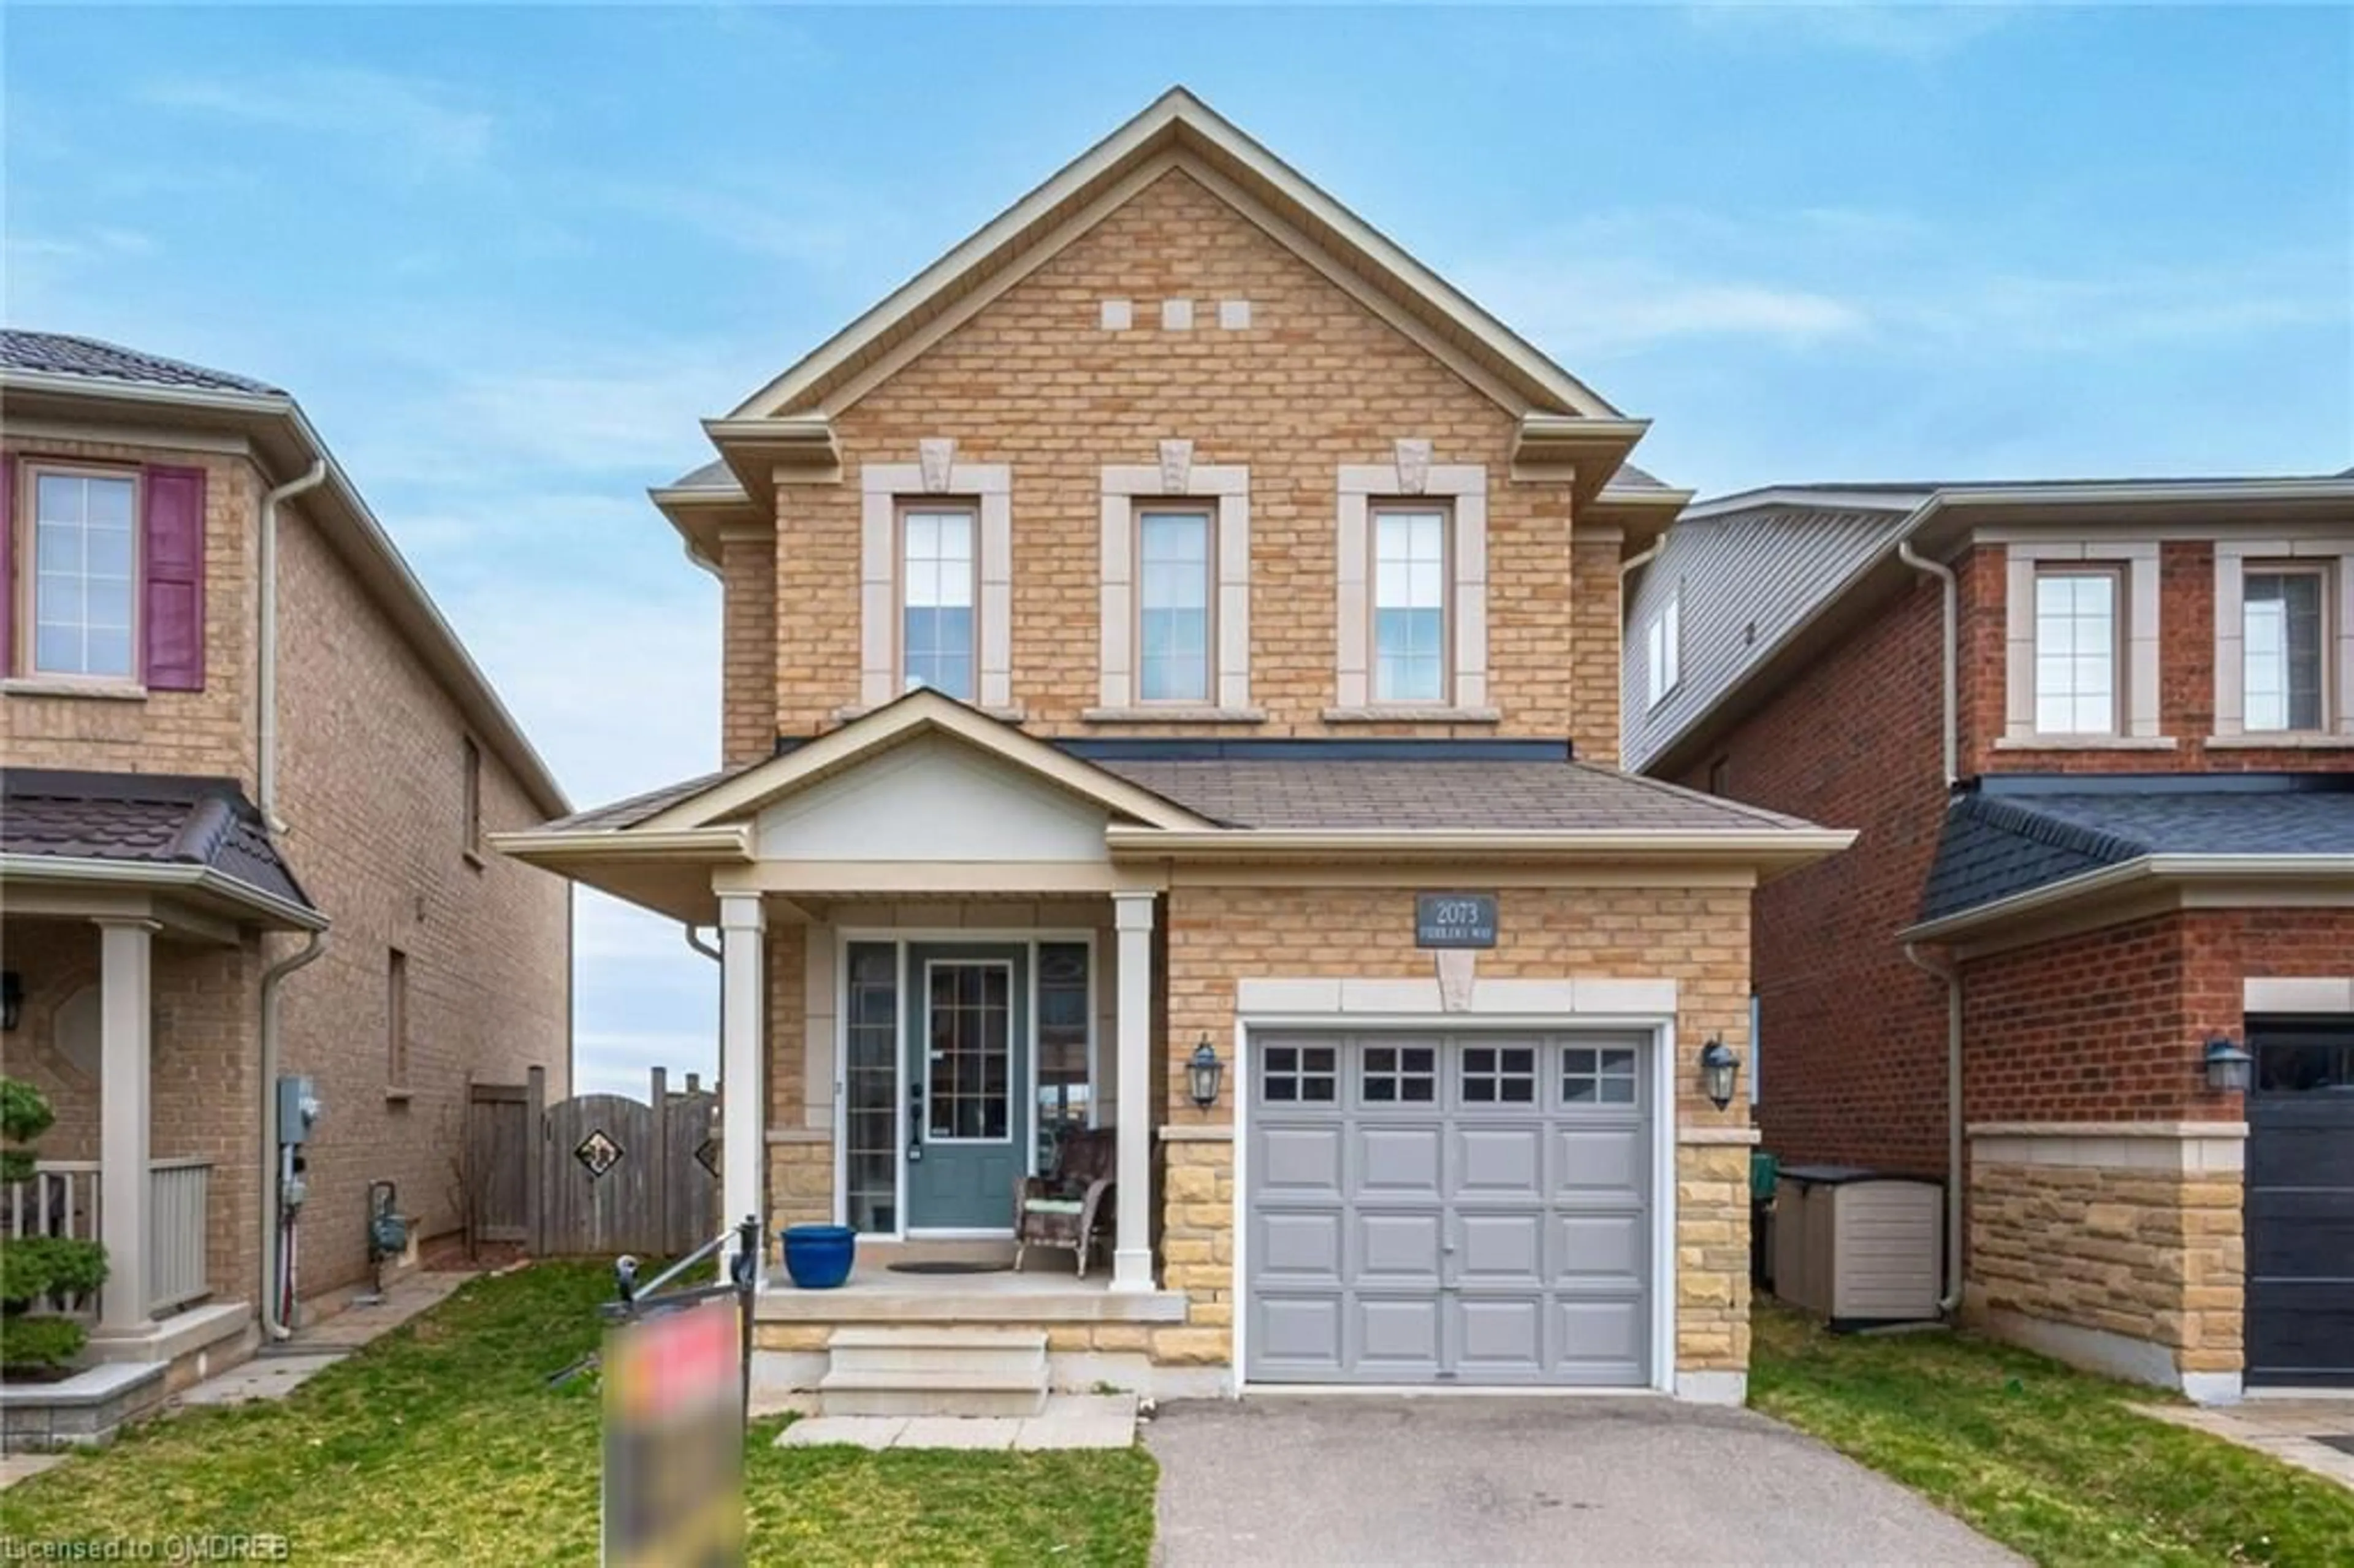 Home with brick exterior material for 2073 Fiddlers Way, Oakville Ontario L6M 0M4